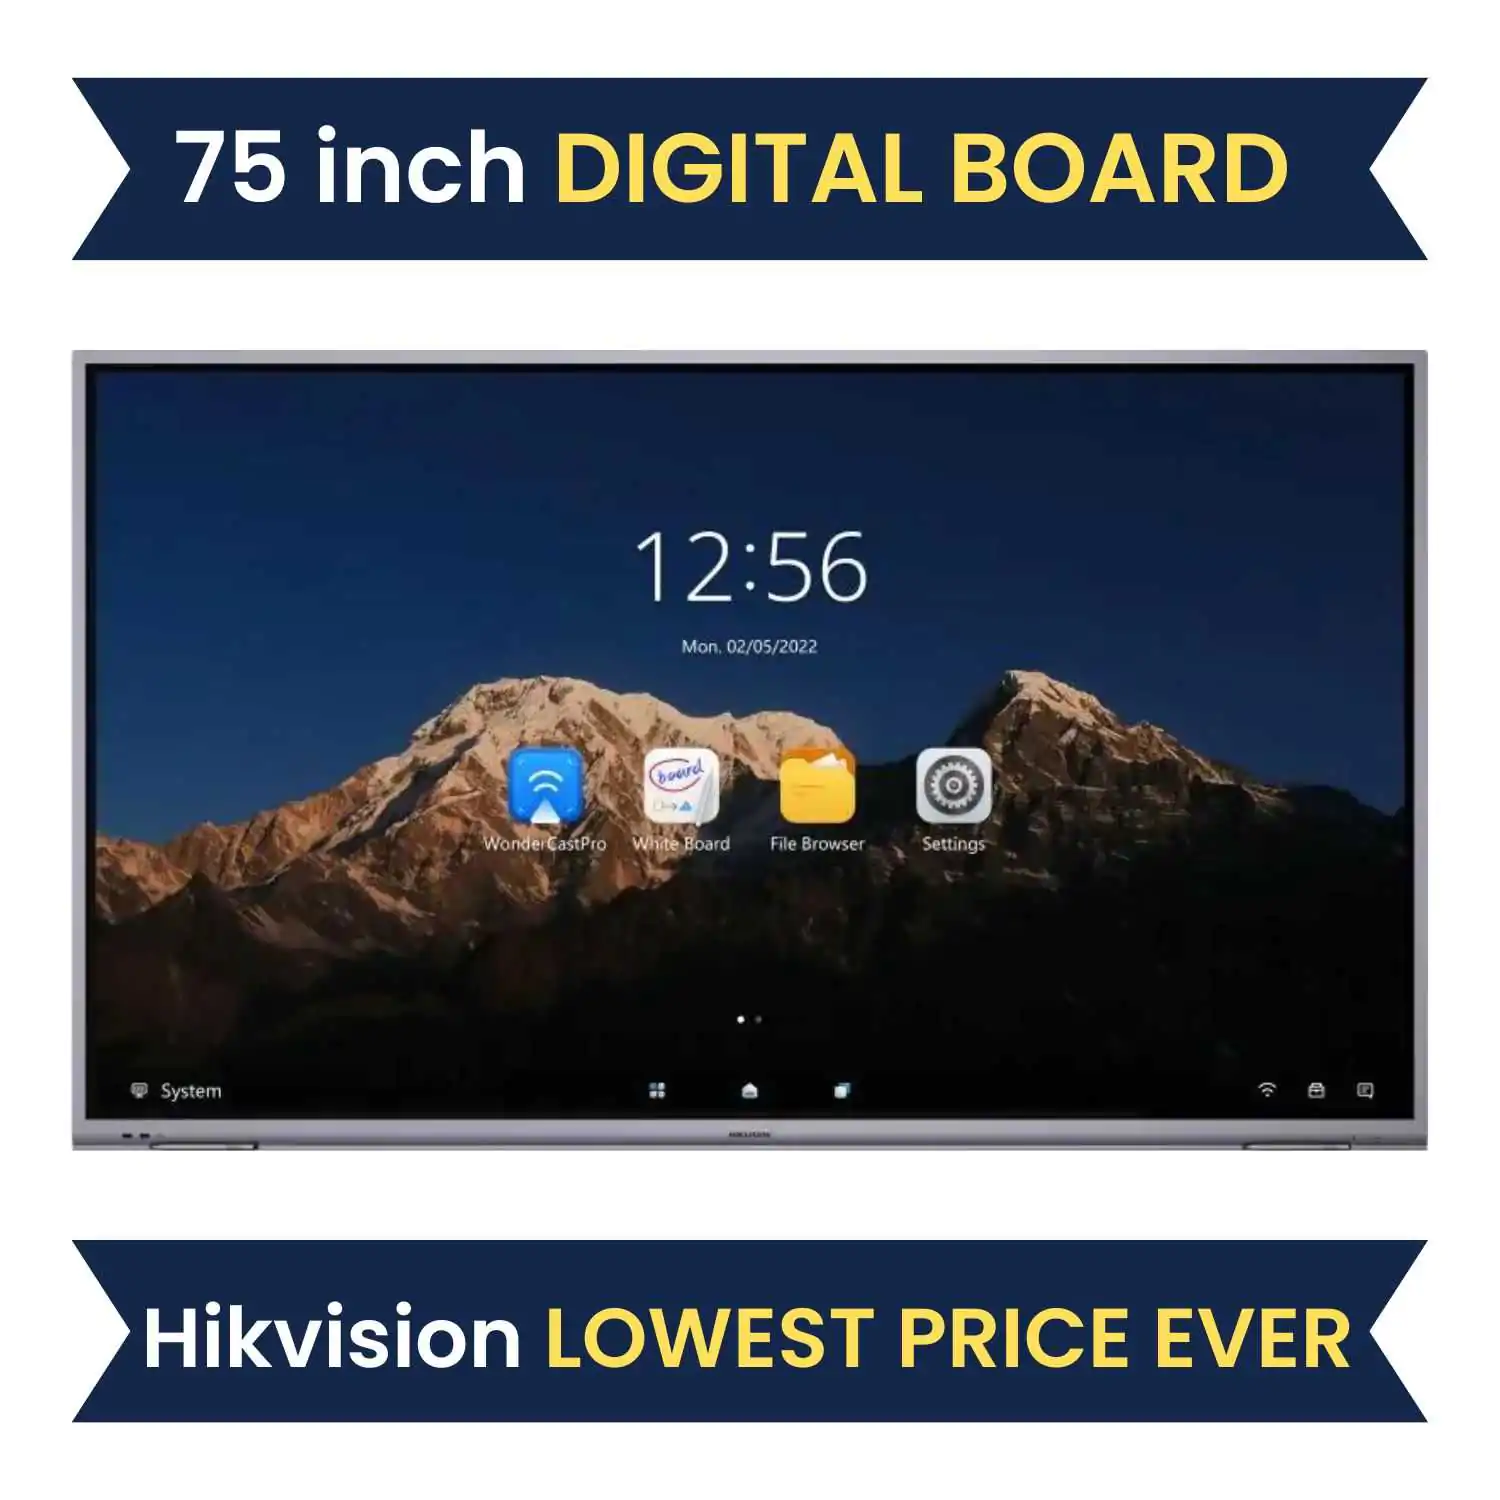 Hikvision DS-D5B75RB/C 75-inch Interactive Flat Panel, Digital Board for Schools, Offices, College, Online Teaching With 4k Resolution, 20px ultra fine writing, Built-in Wi-Fi, Looping-out display, Compatible with OPS/OPS-C devices, realizing smooth switch between built-in systems, Ultra-thin design with aluminum profile frame & much more